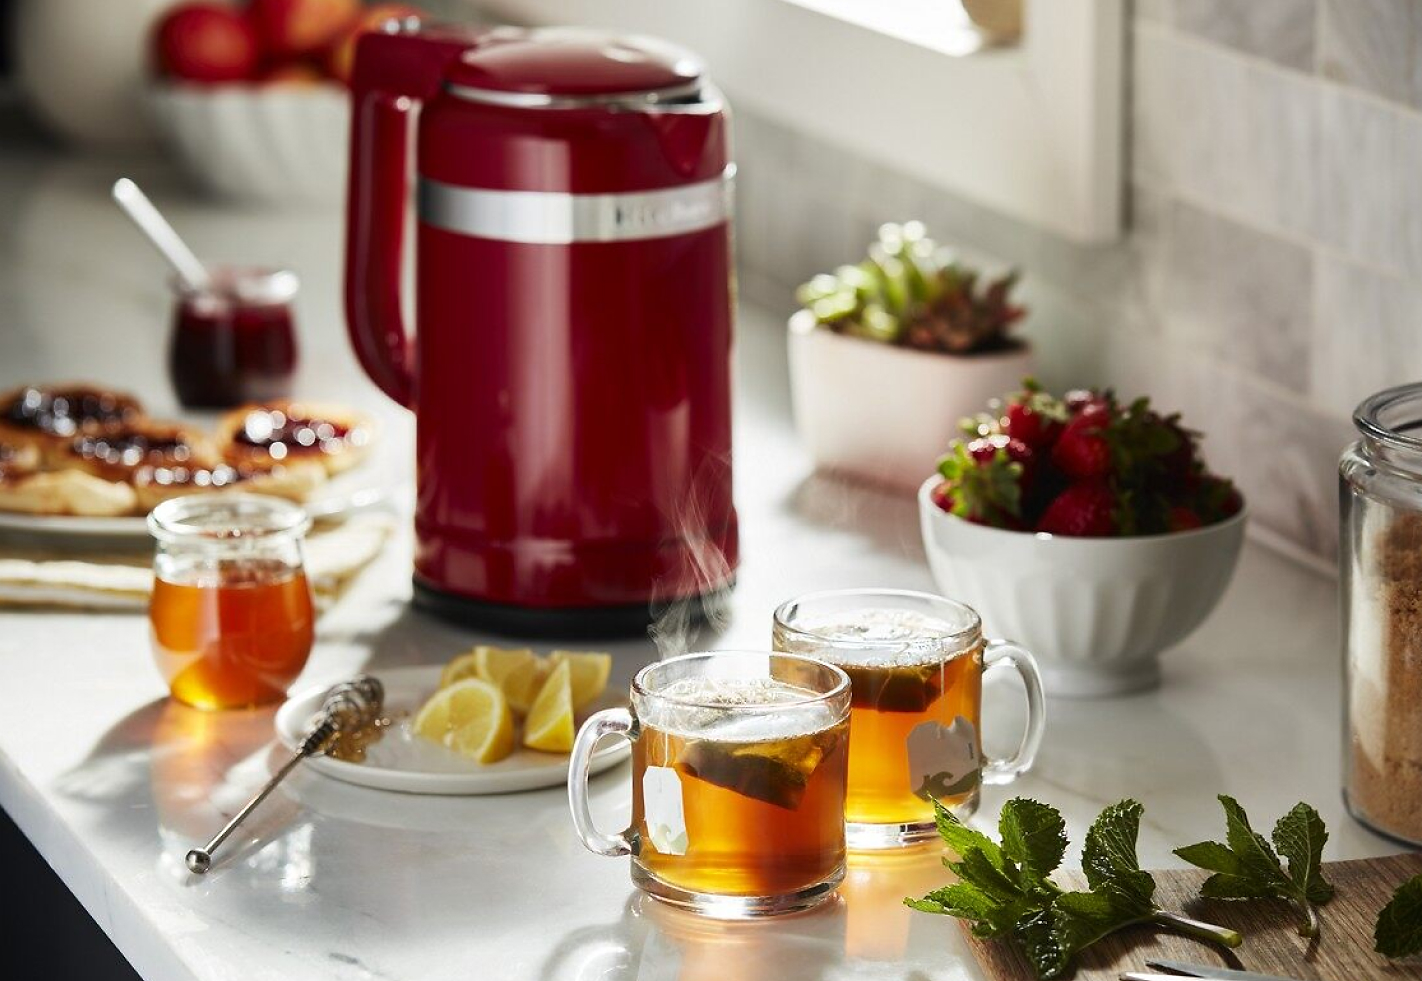 Red electric tea kettle on countertop with tea and food